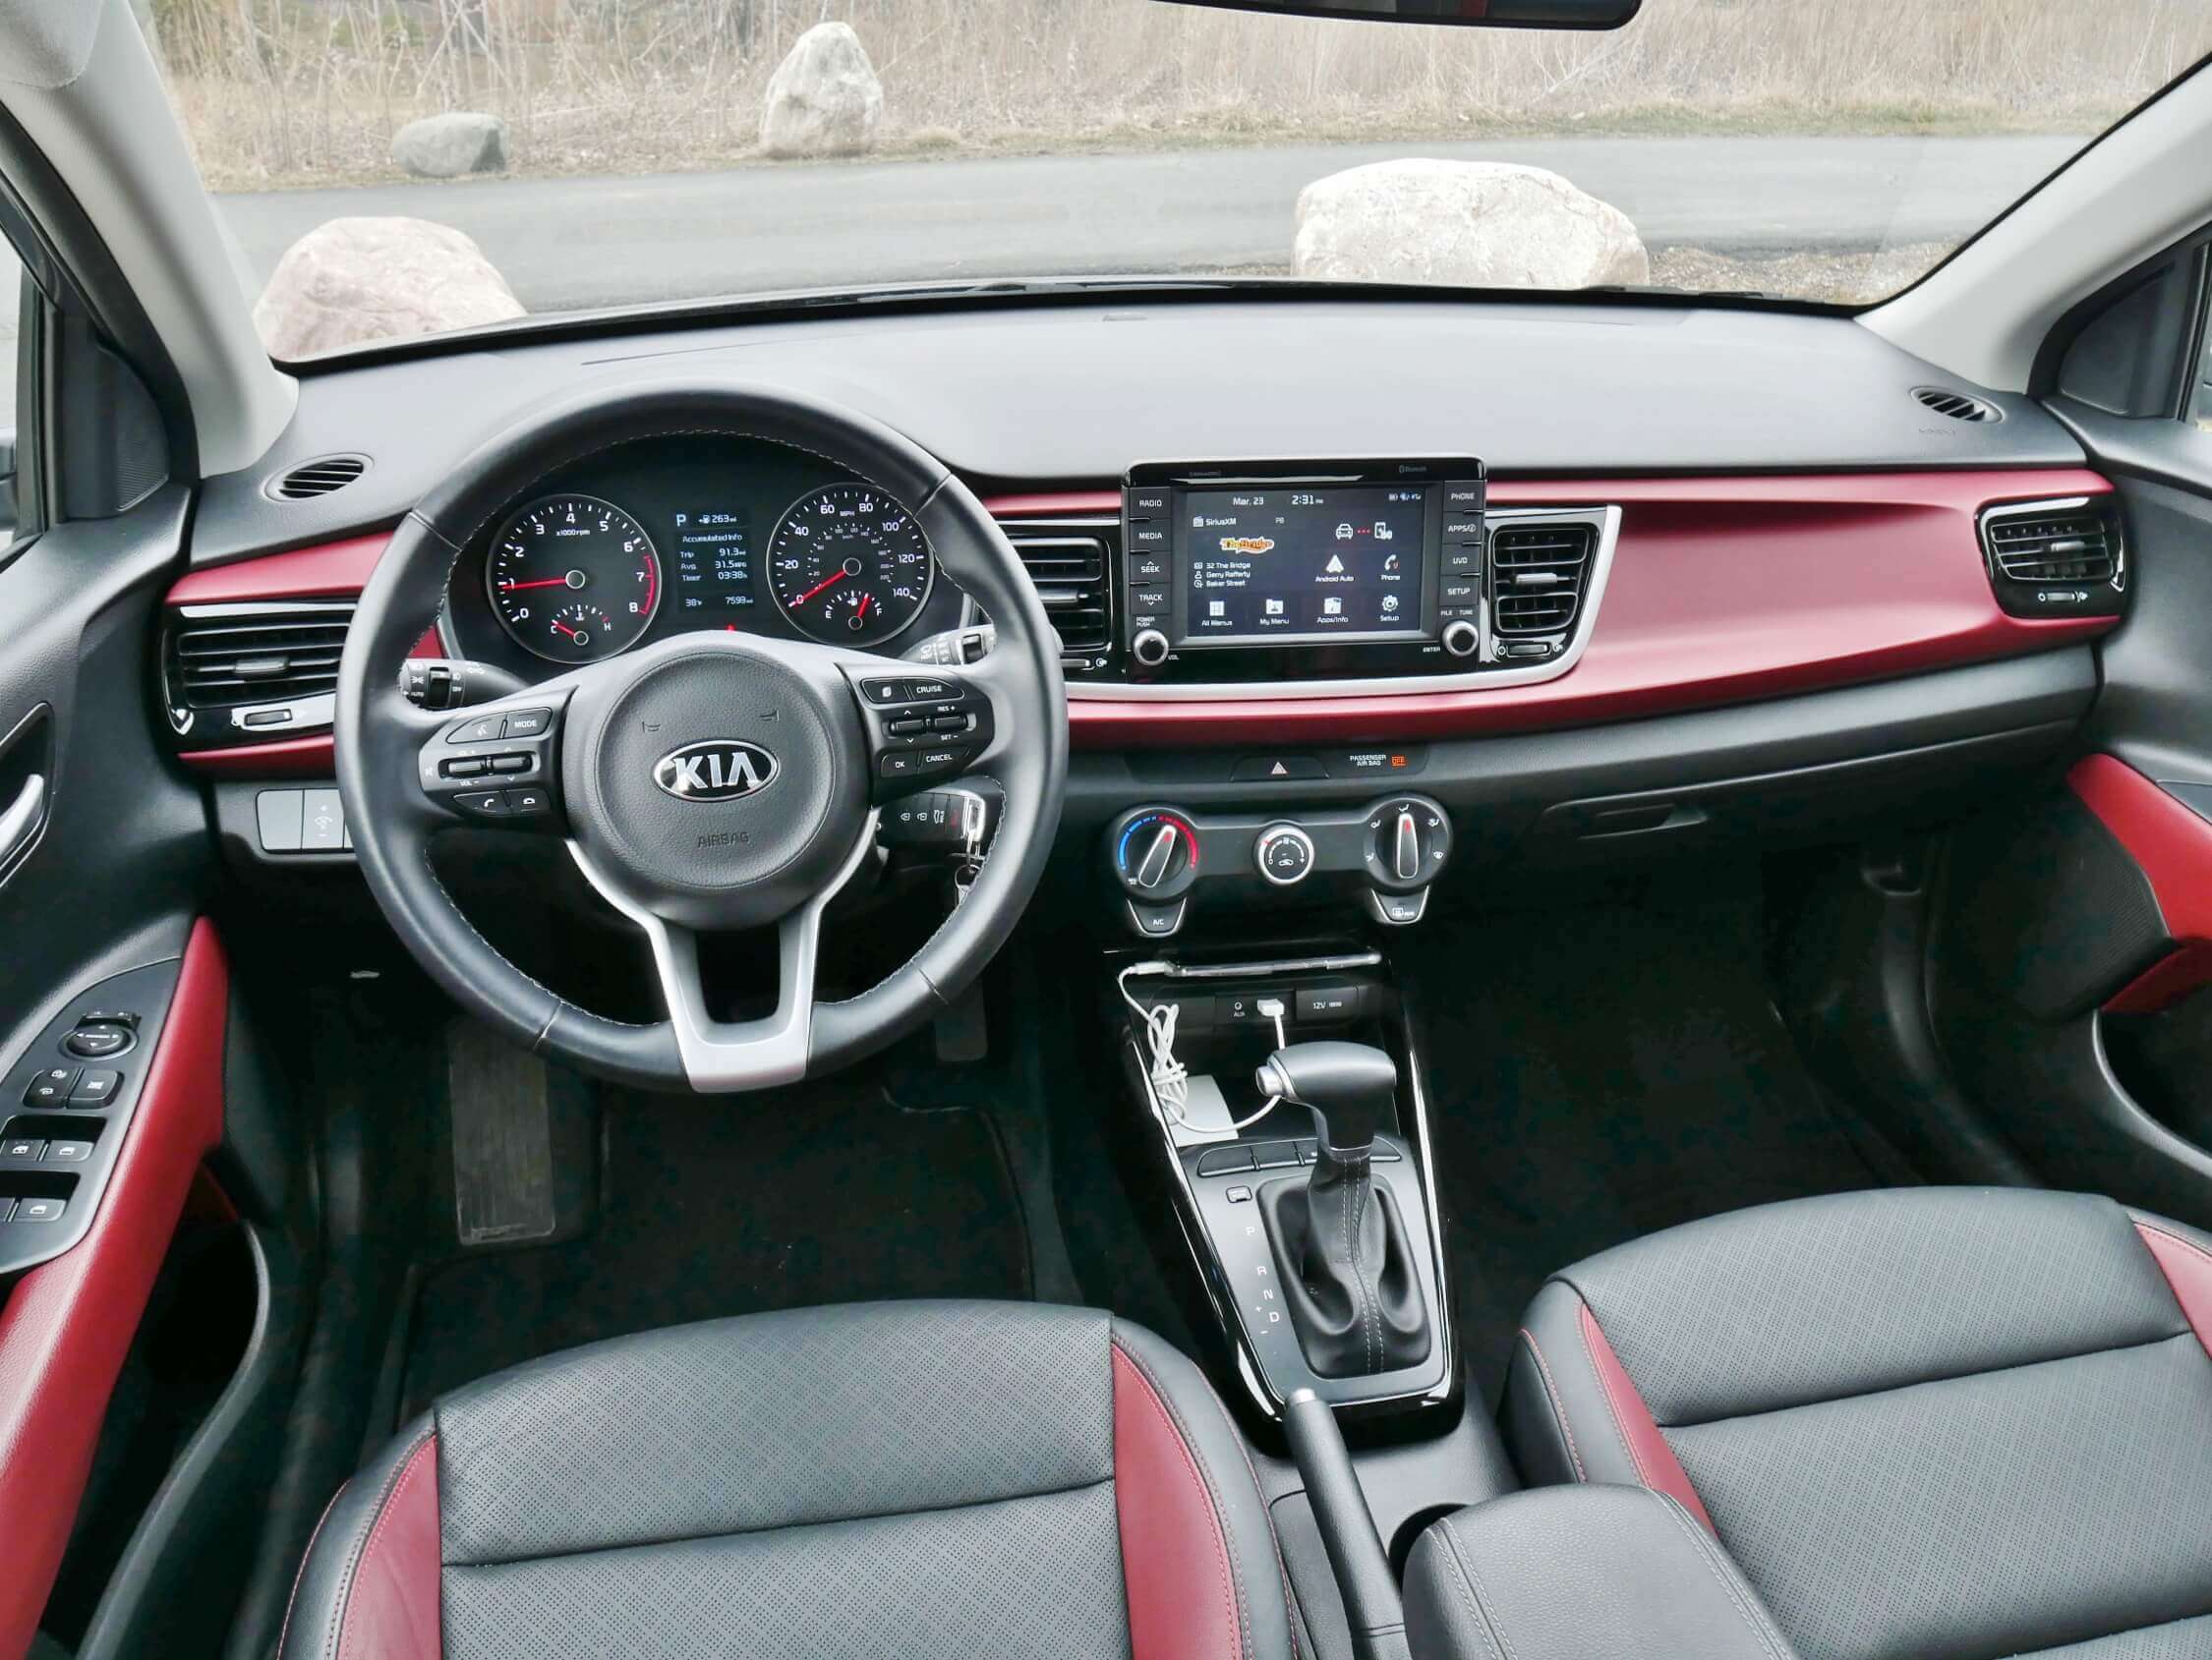 2018 Kia Rio 5 door EX: cockpit is airy, instrumentation highly legible, control layout logically placed